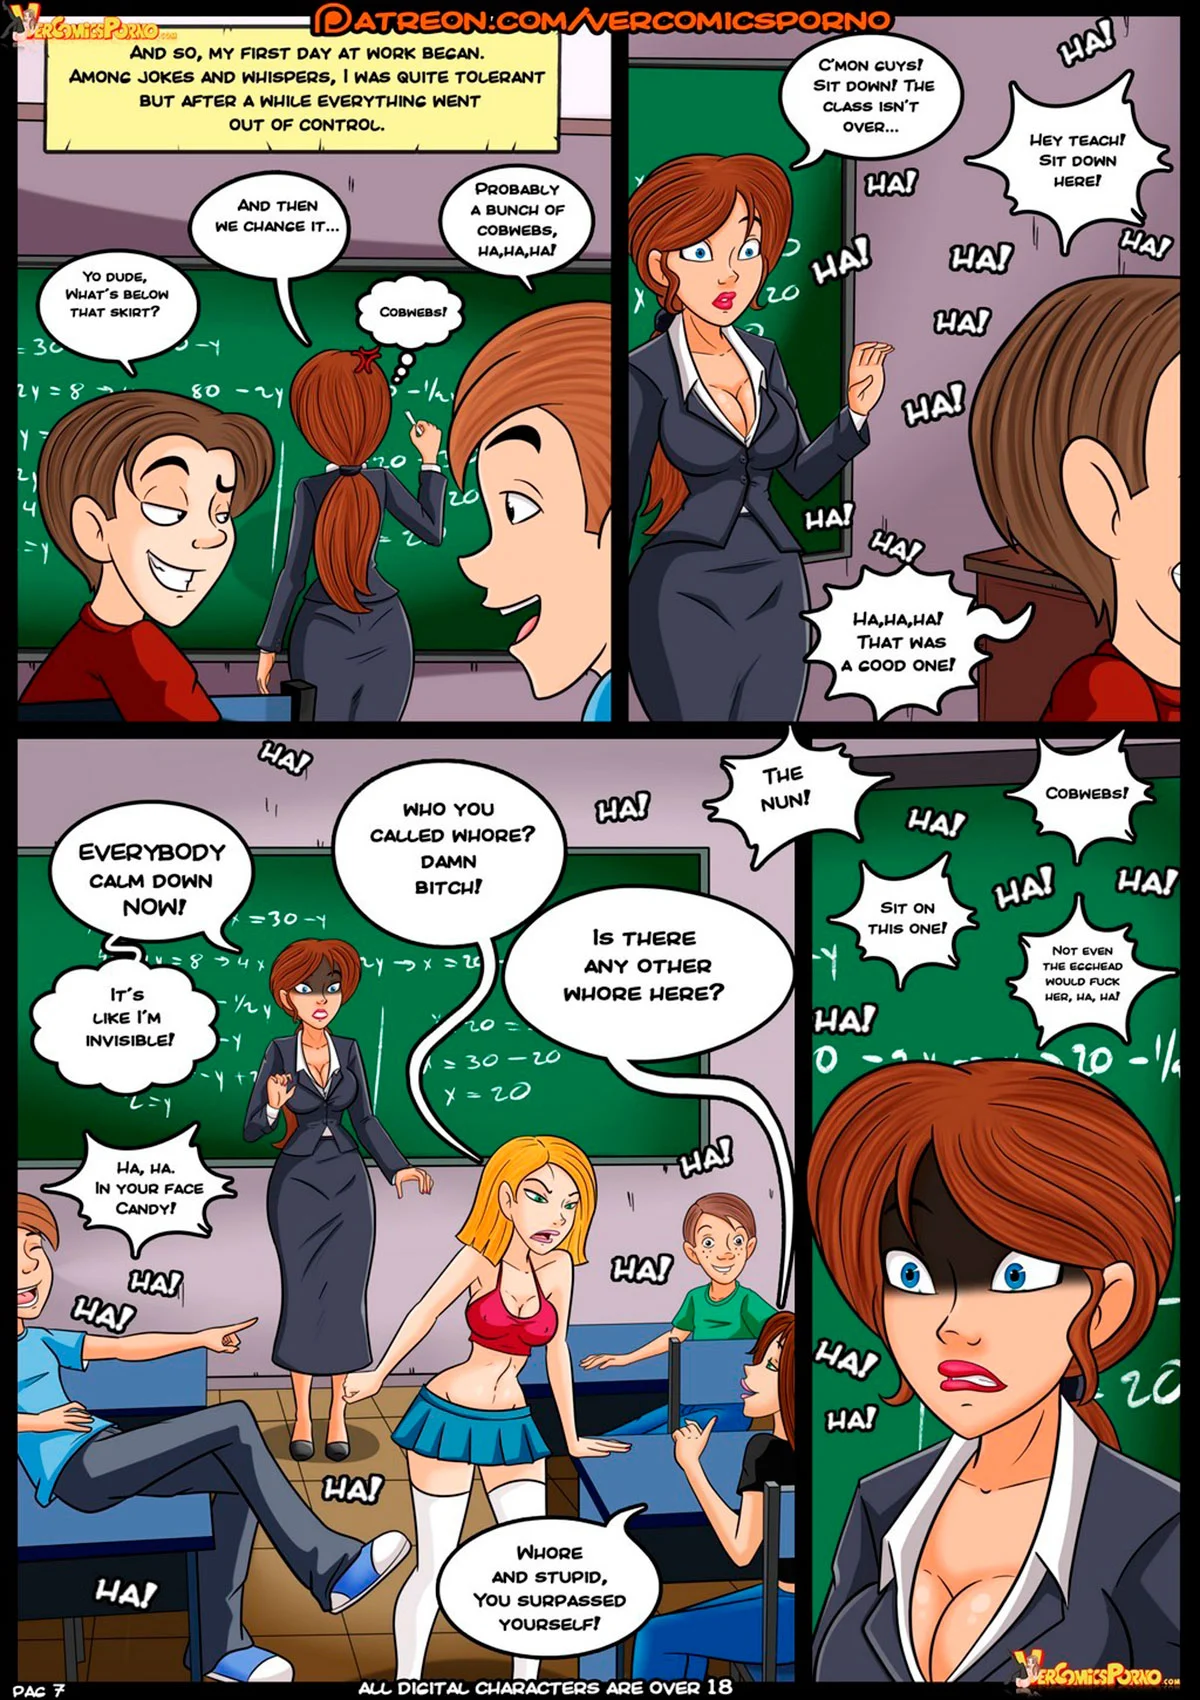 Croc comic "Valery Chronicles" - page 7